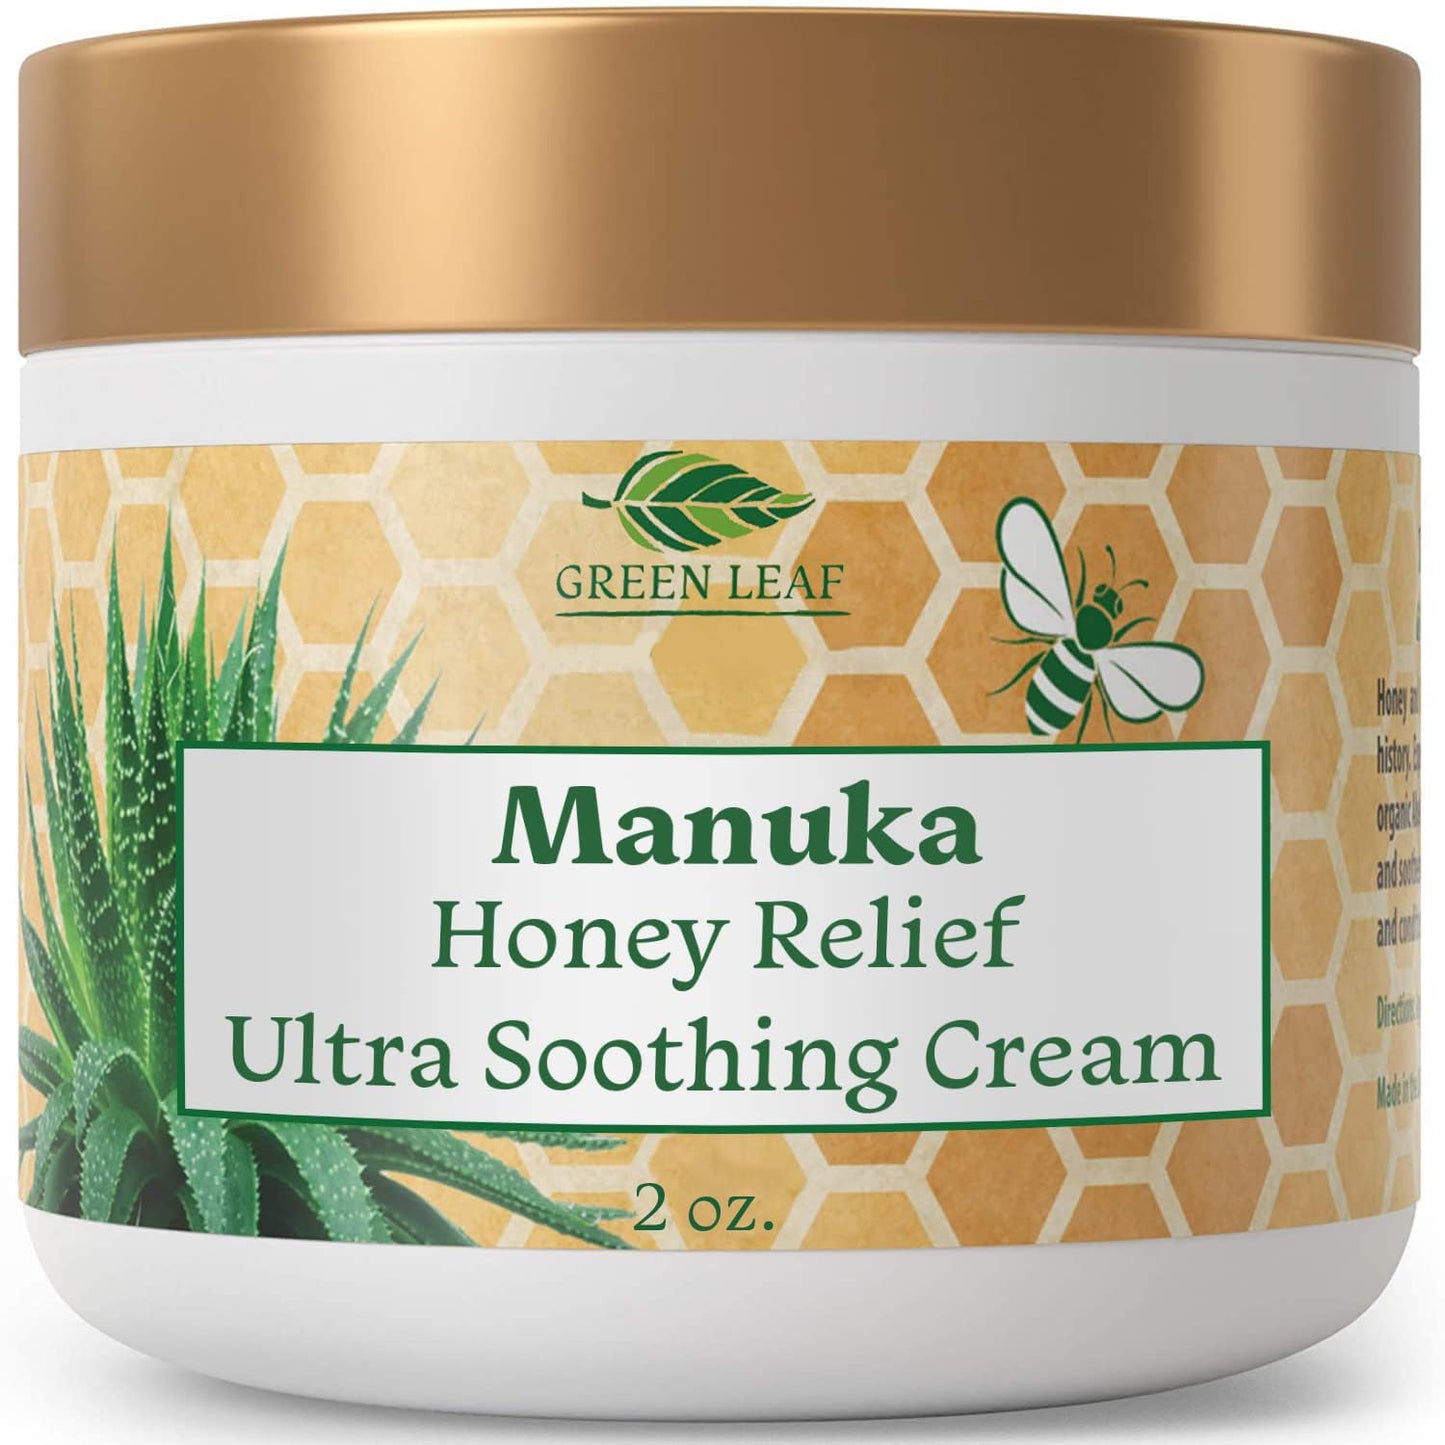 Manuka Honey Cream - Eczema Honey Cream Moisturizer Lotion Treatment for Ezcema & Psoriasis - Ultra Soothing Relief - Face & Body Care, Itchy, Dry Skin Rash Healing Ointment - For Adults & Kids